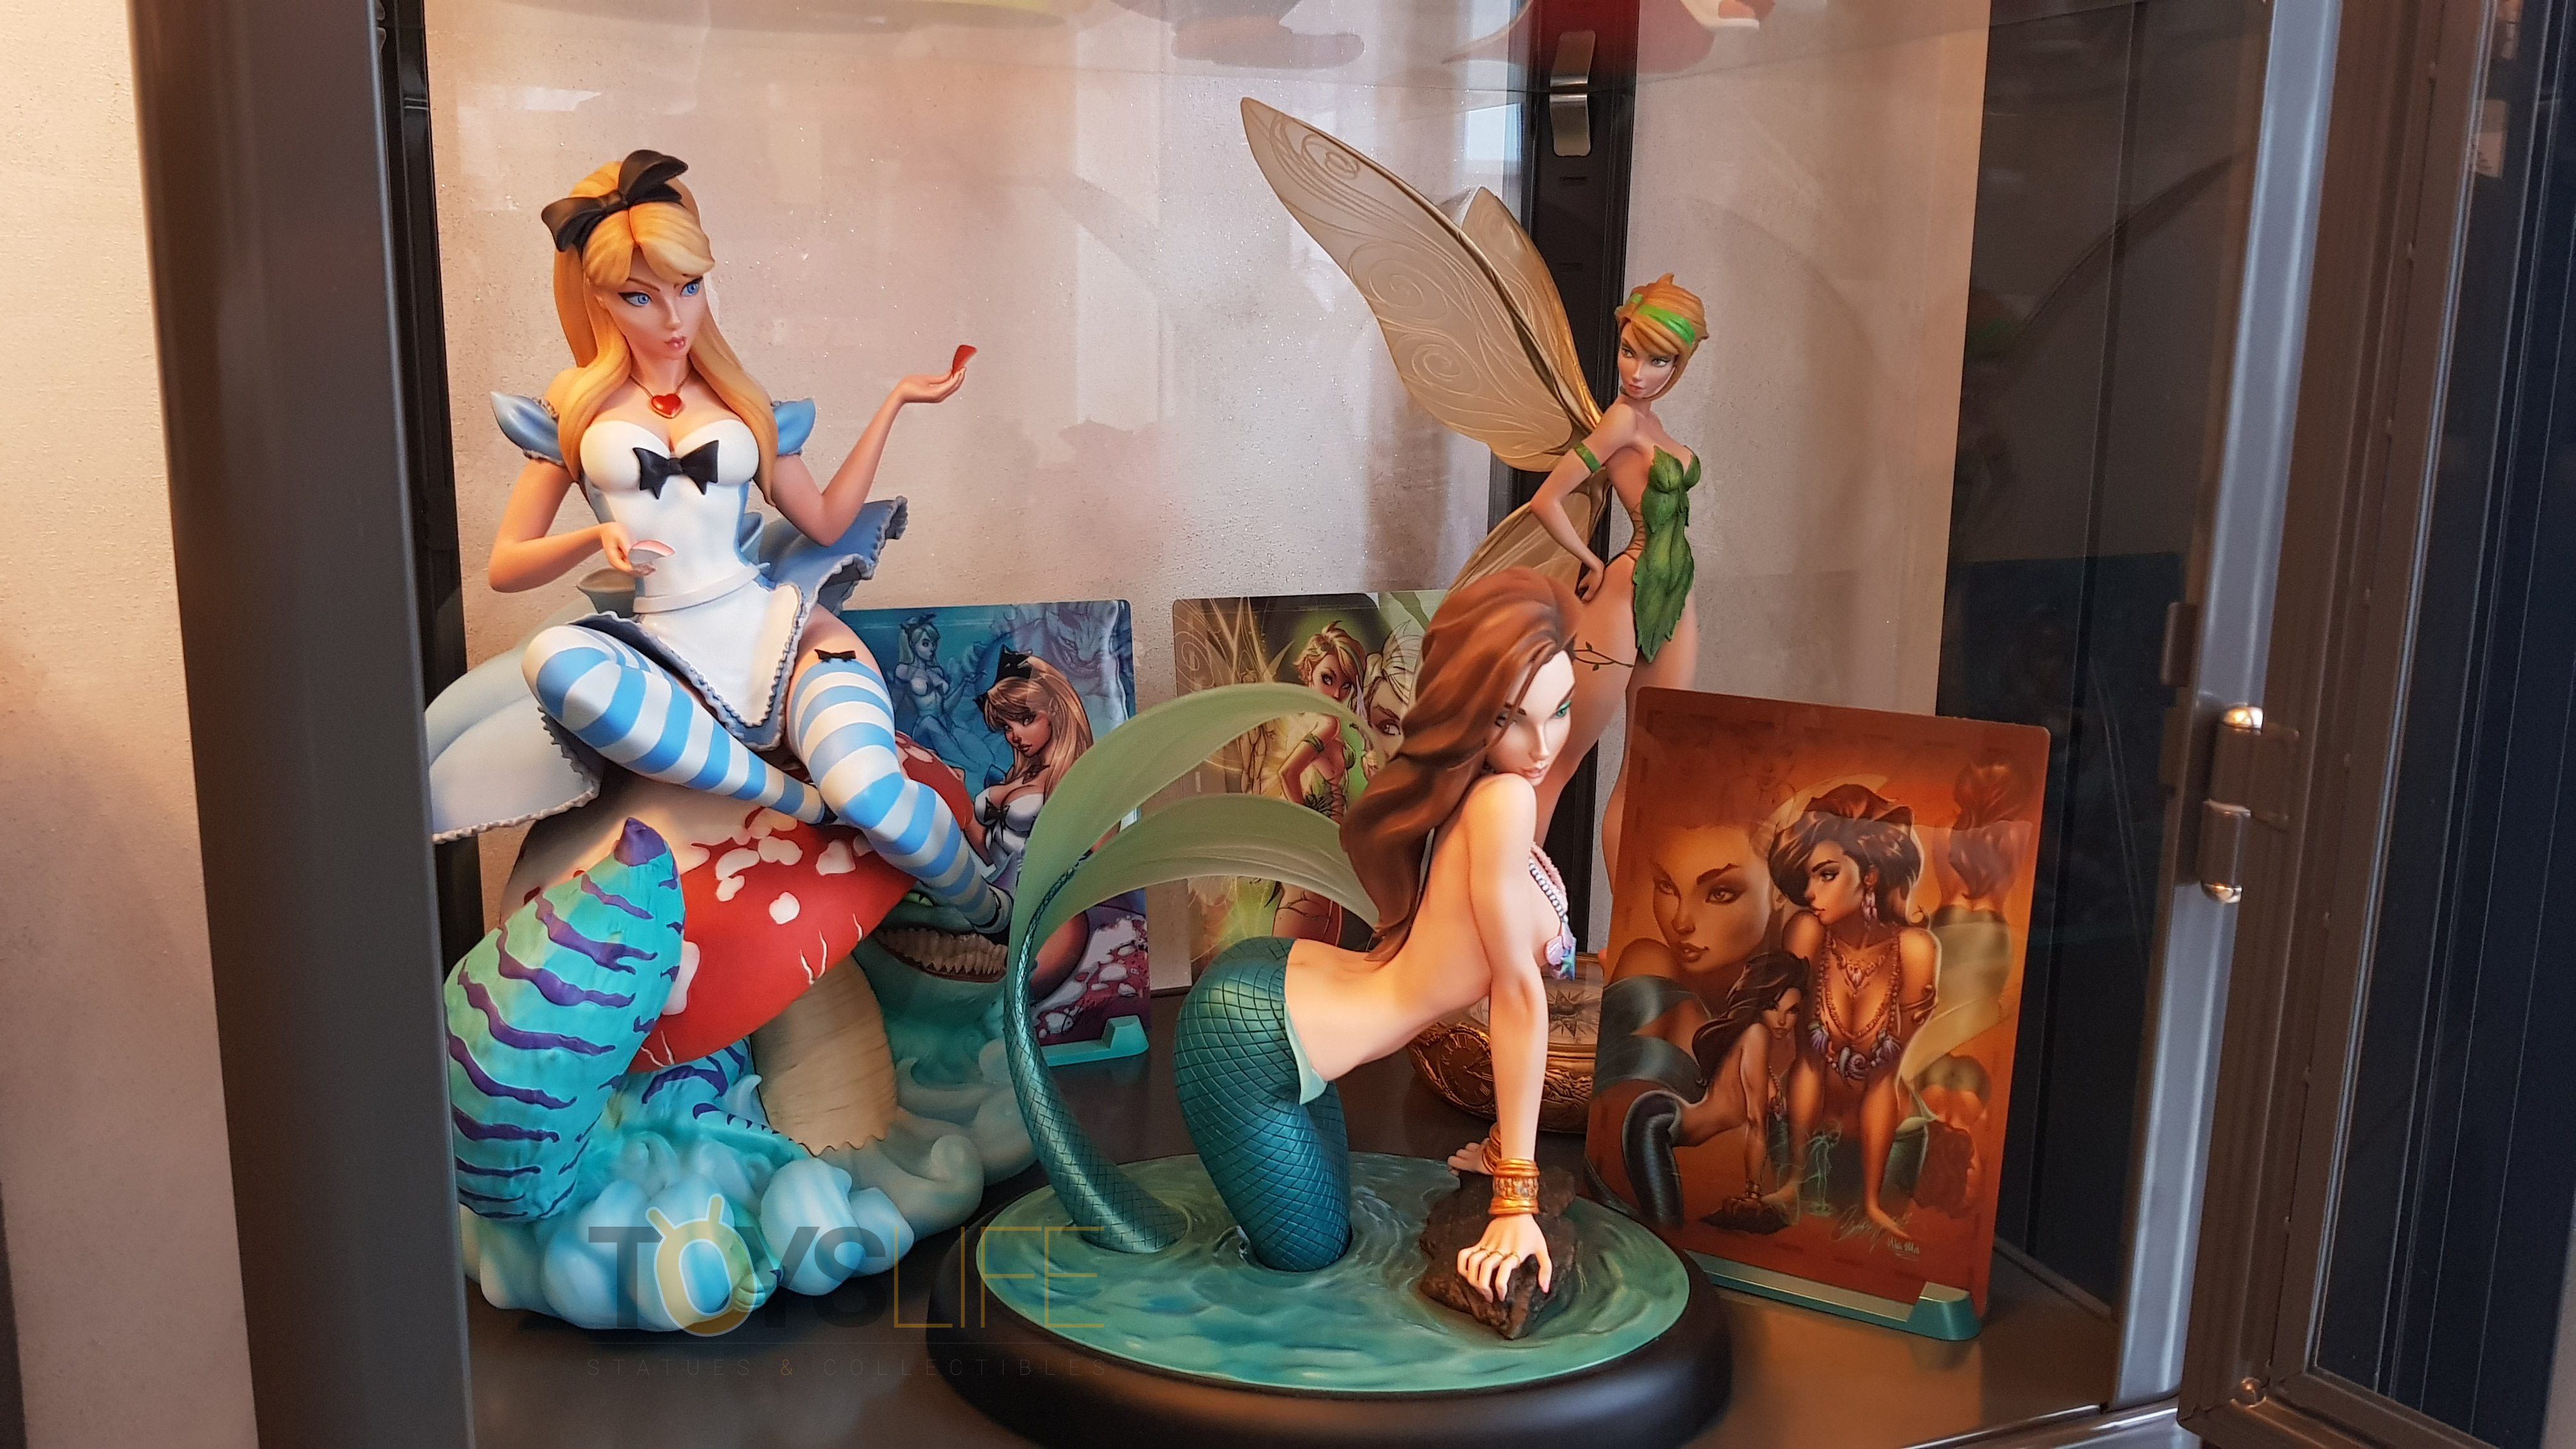 sideshow-fairytale-fantasies-jscampbell-alice-exclusive-statue-toyslife-review-19